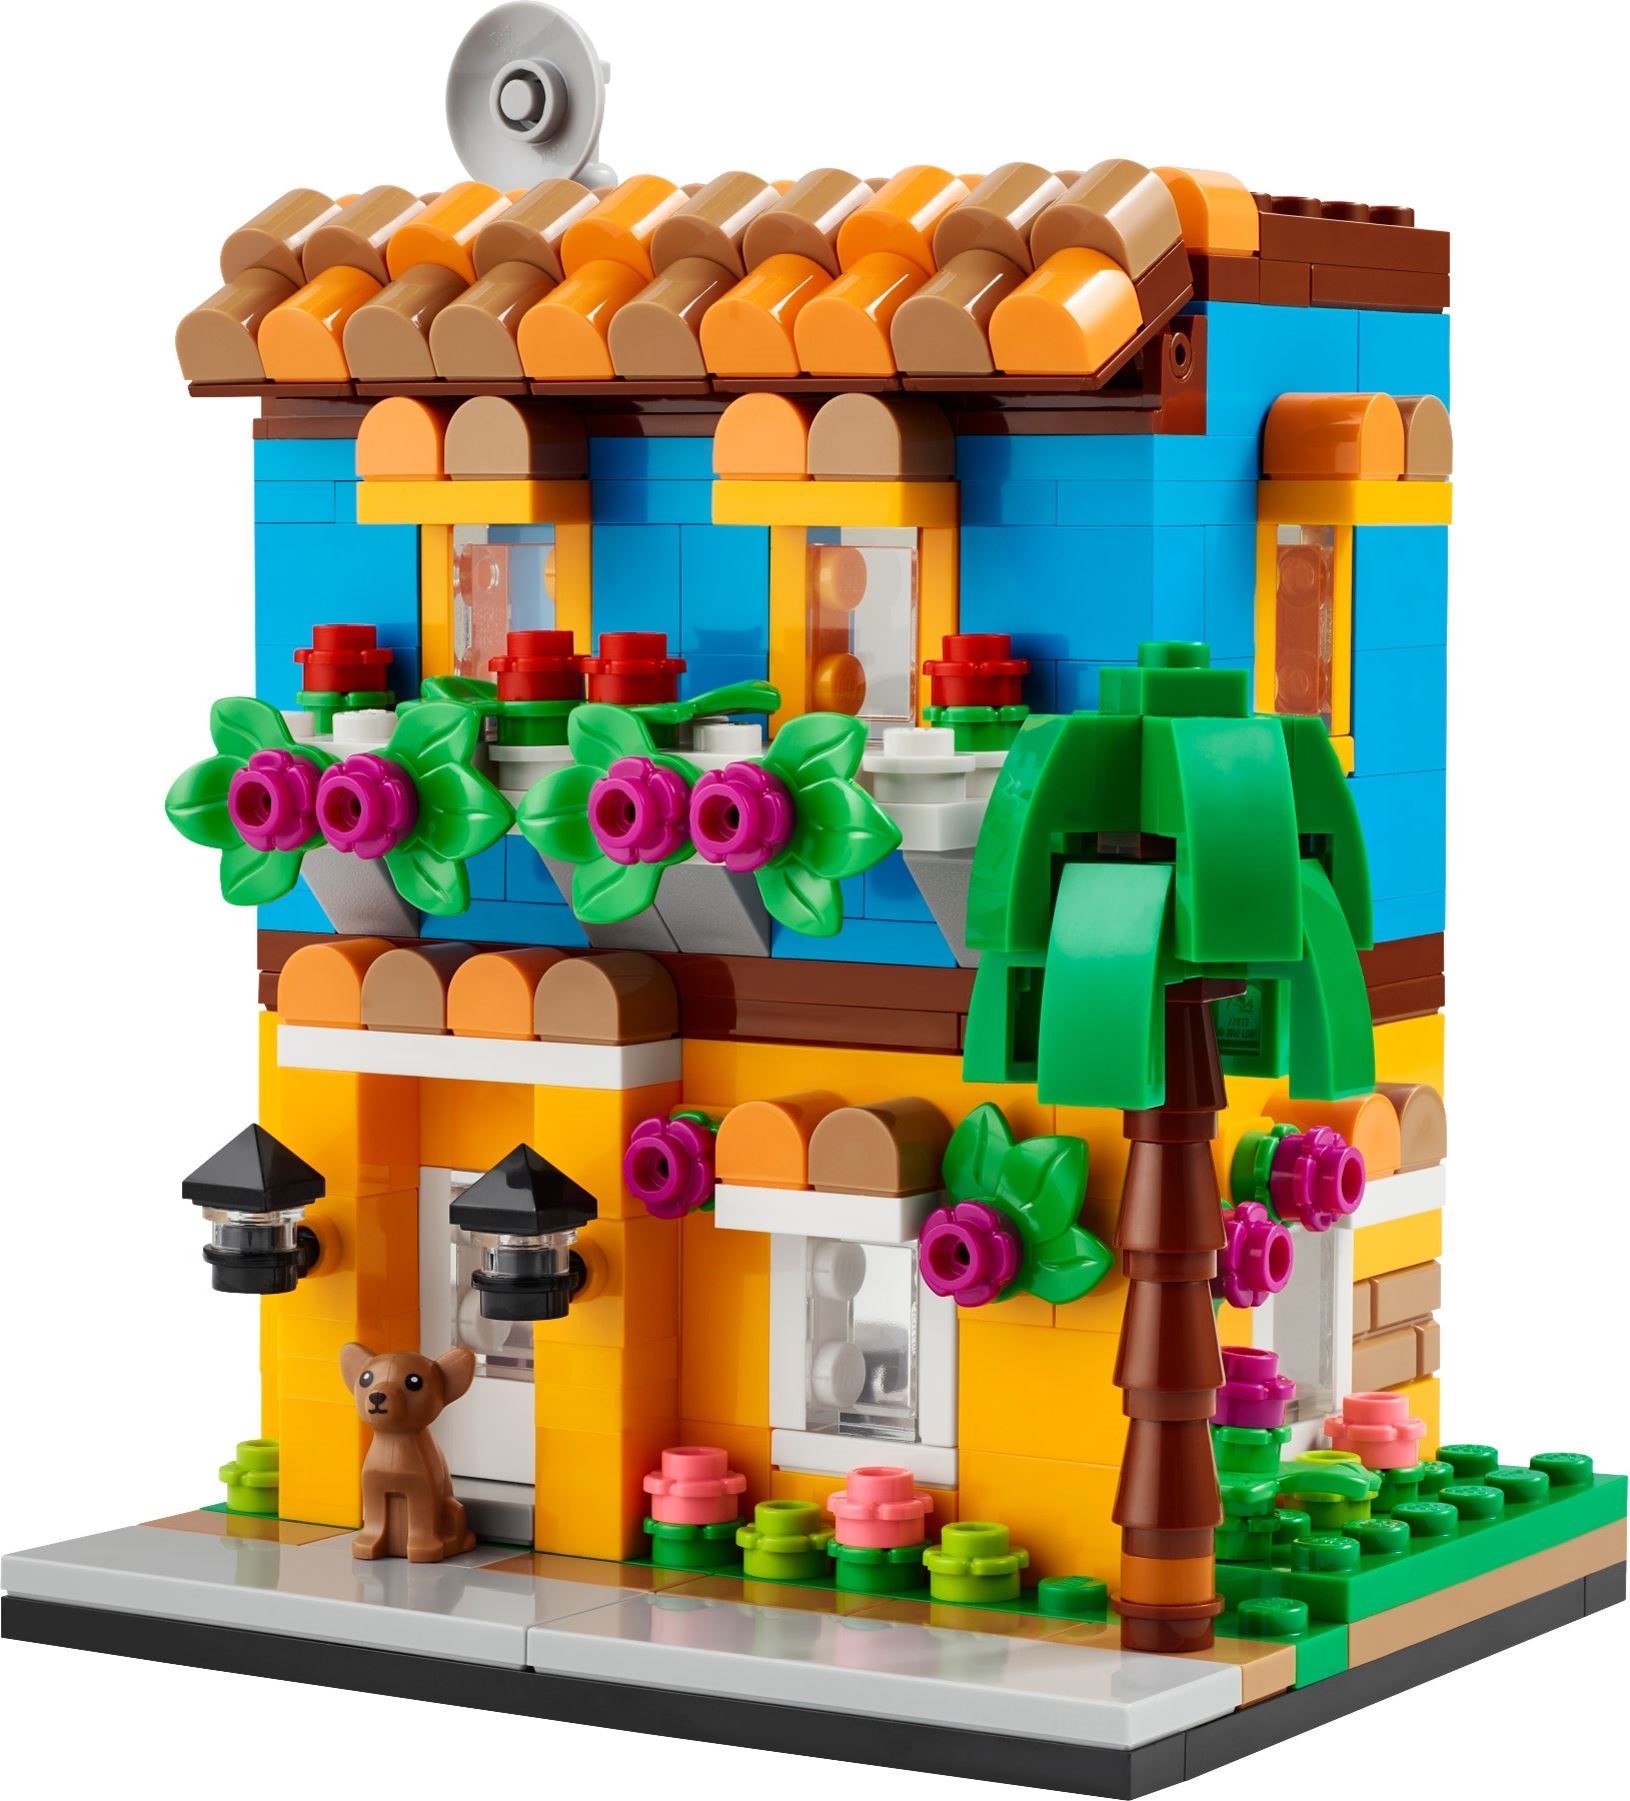 Houses of the World collection will consist of four | Brickset